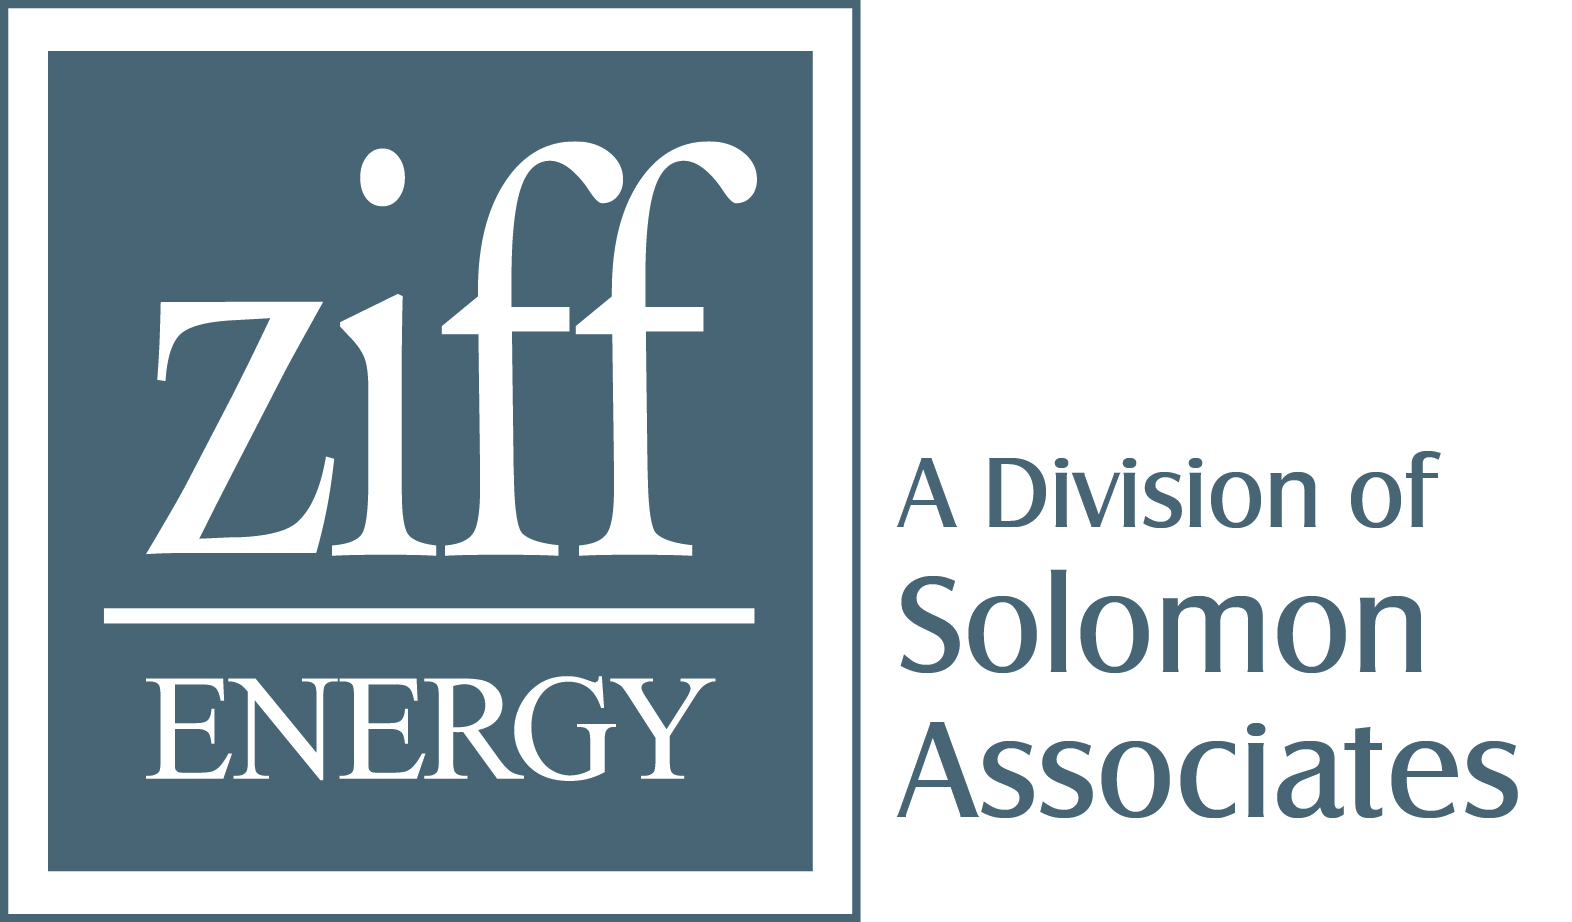 Ziff Energy, a Division of Solomon Associates, announces release of Growth of North American Natural Gas Demand to 2020